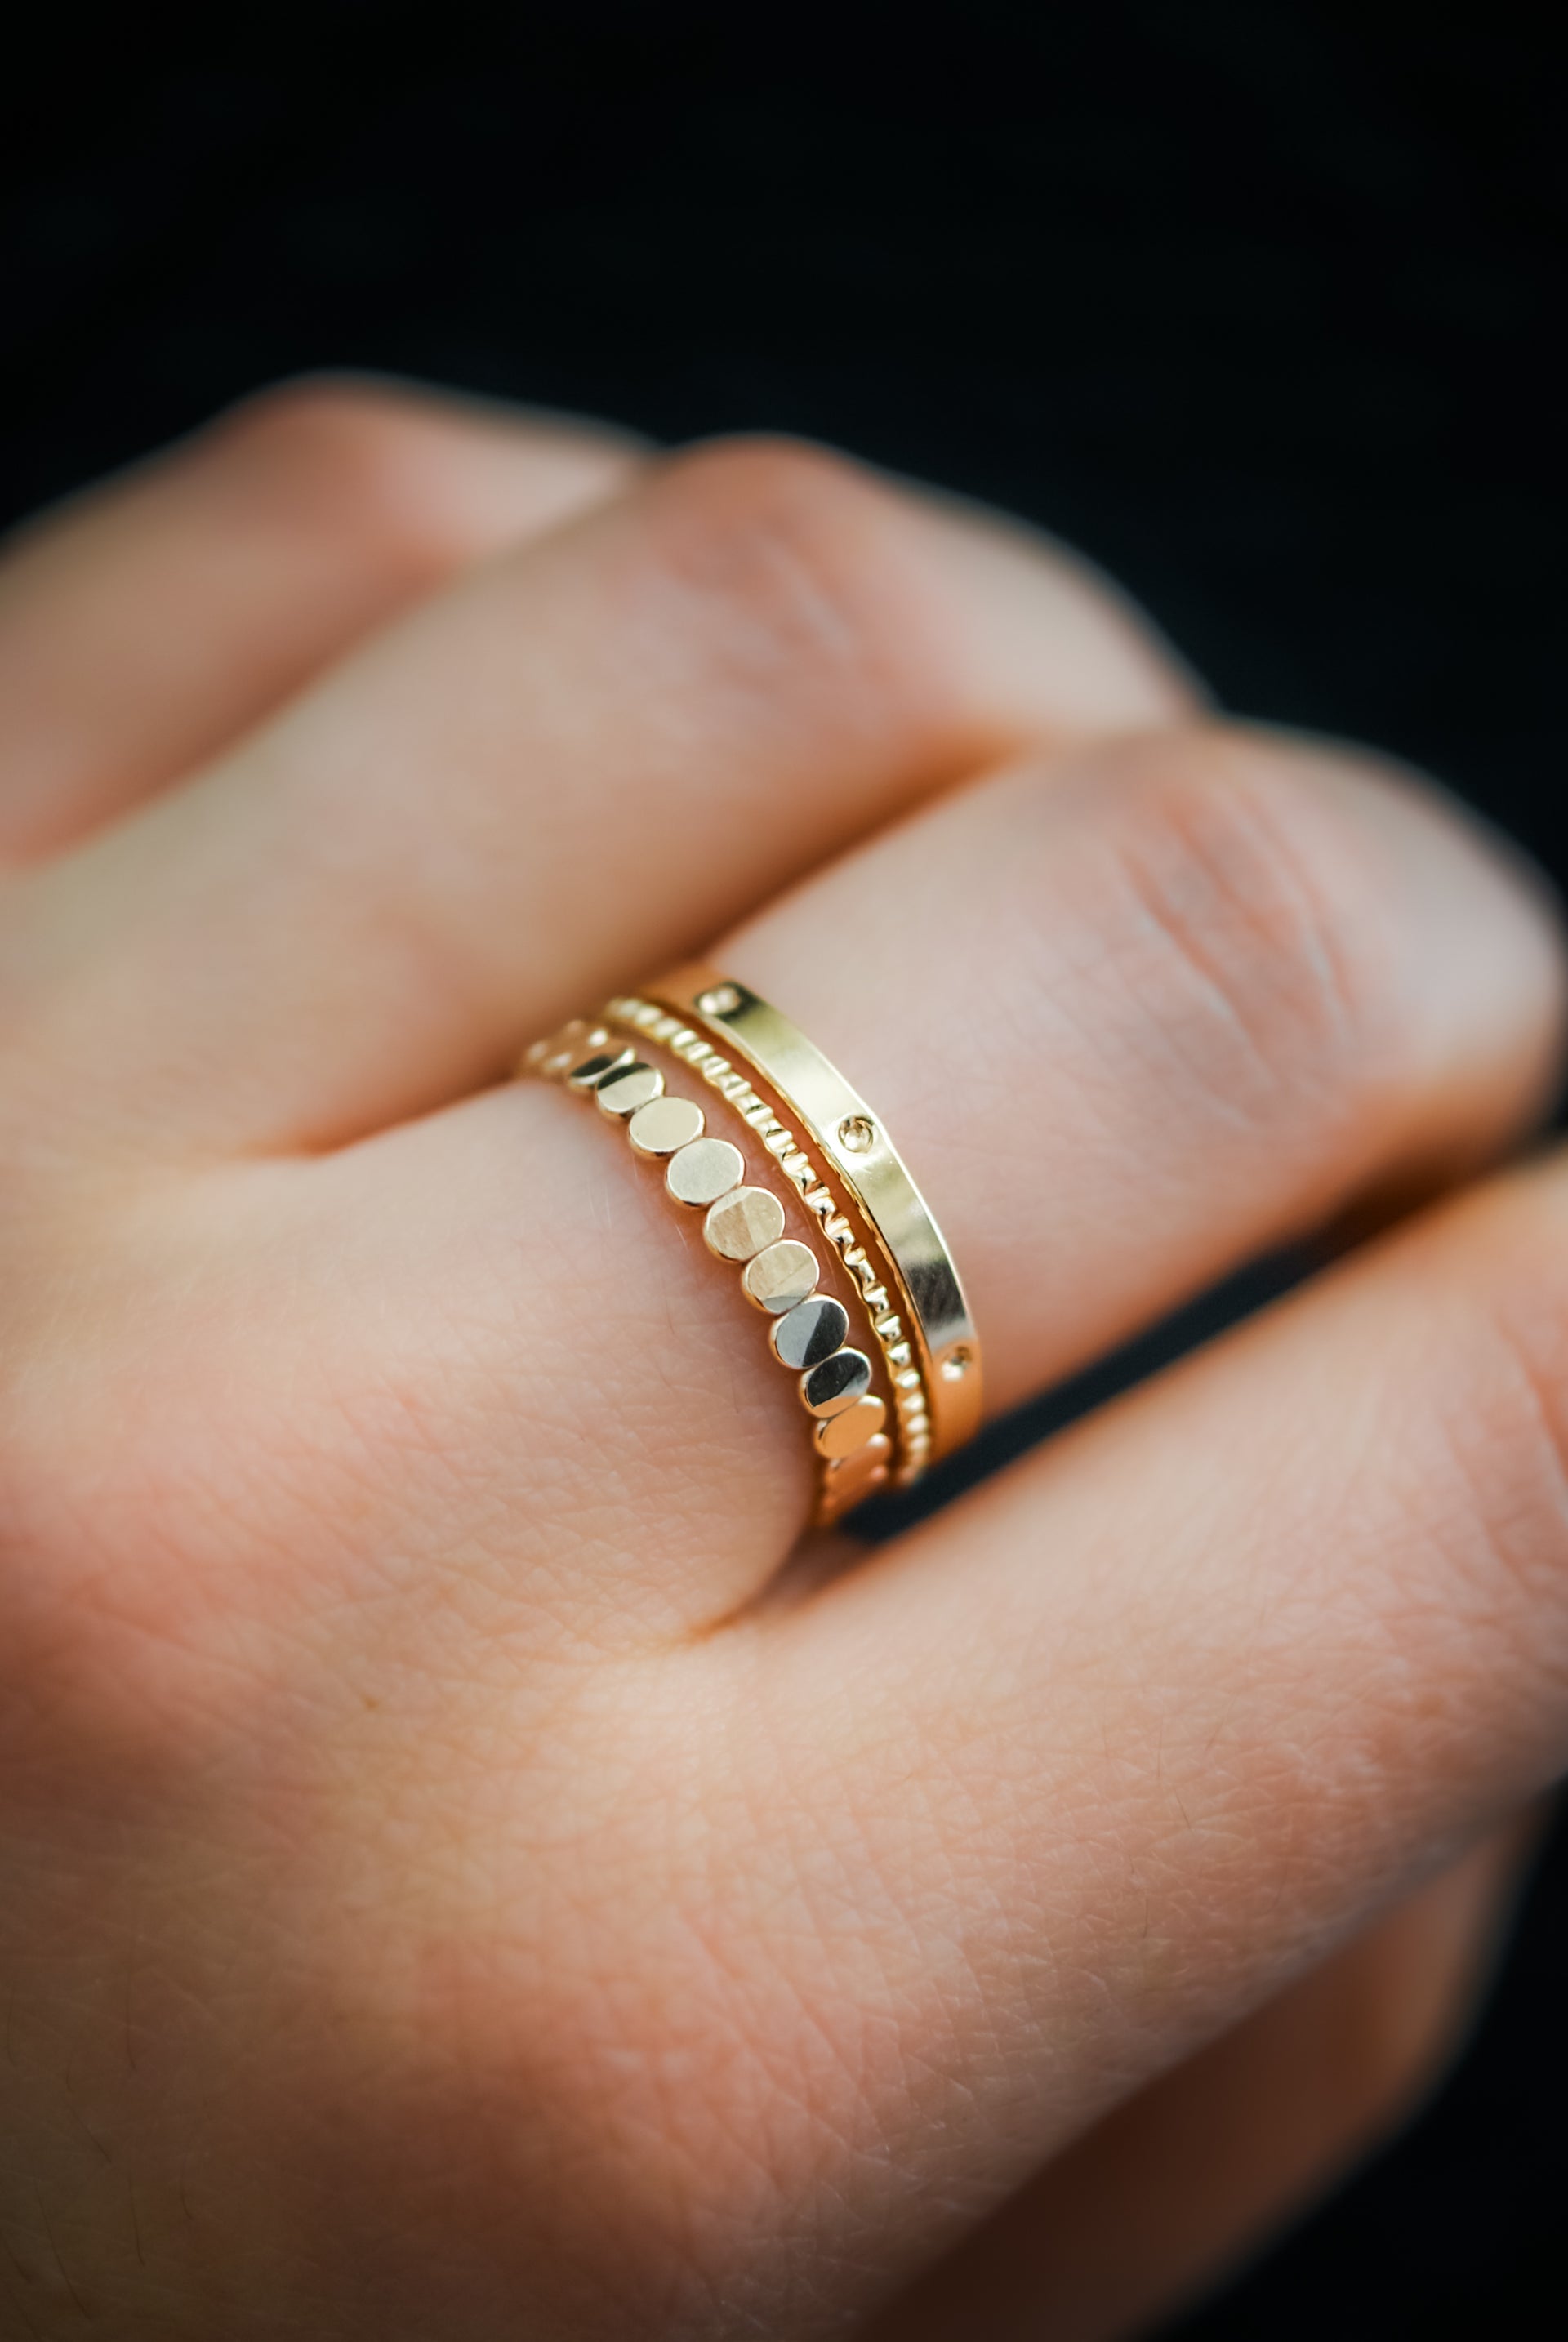 My mixed gold, gems and dimaond ring stack : r/RingShare